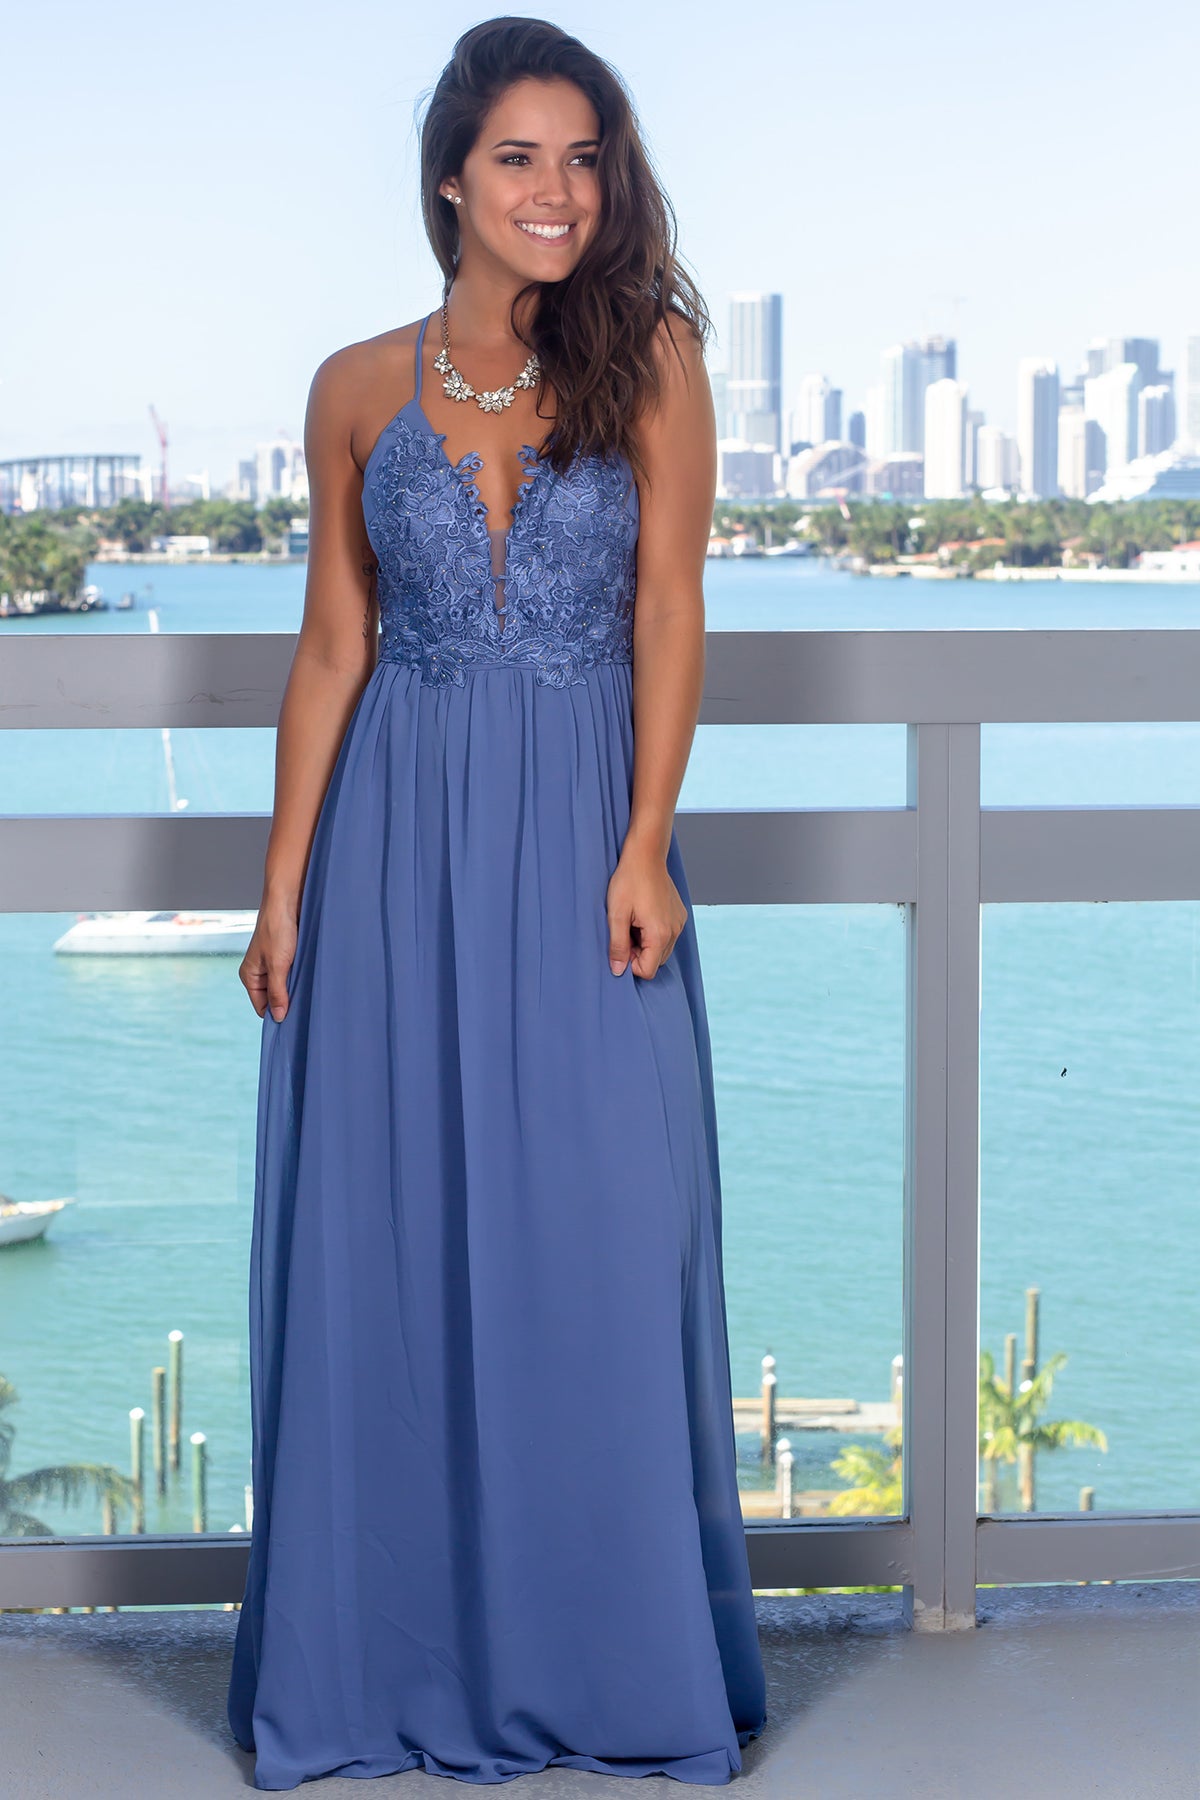 Slate Blue Maxi Dress with Criss Cross Back | Maxi Dresses – Saved by ...